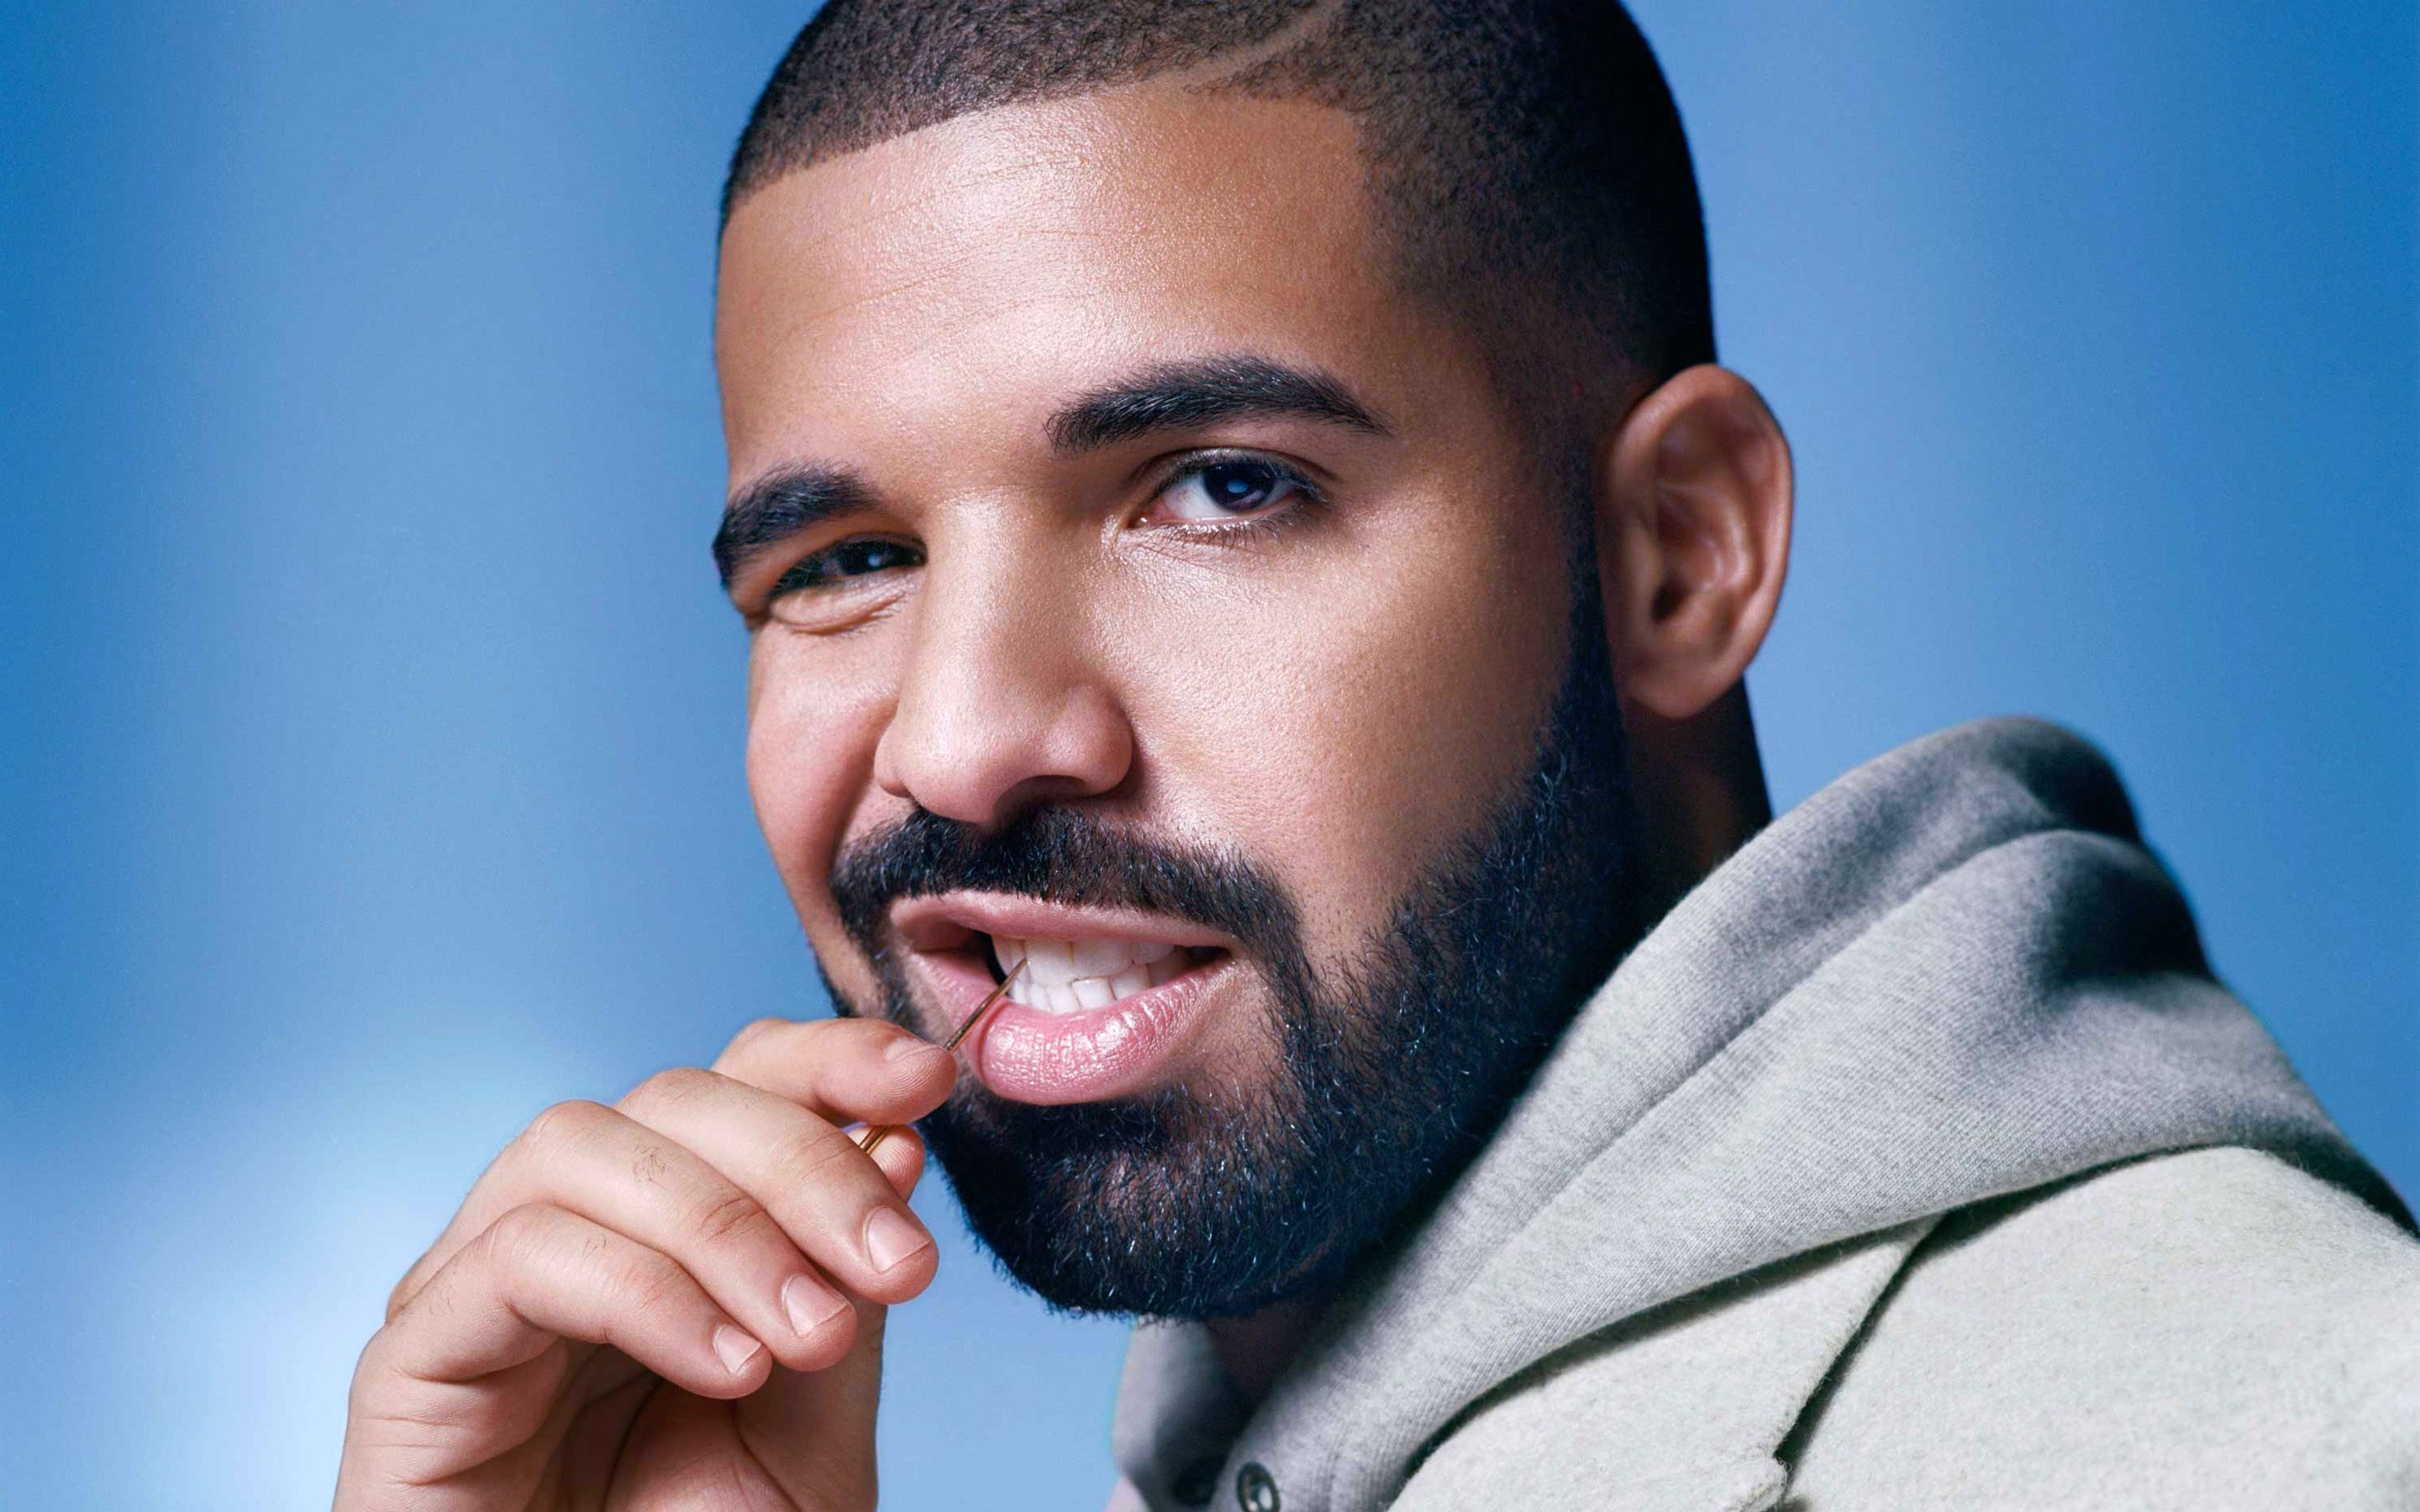 Drake 4K wallpaper for your desktop or mobile screen free and easy to download